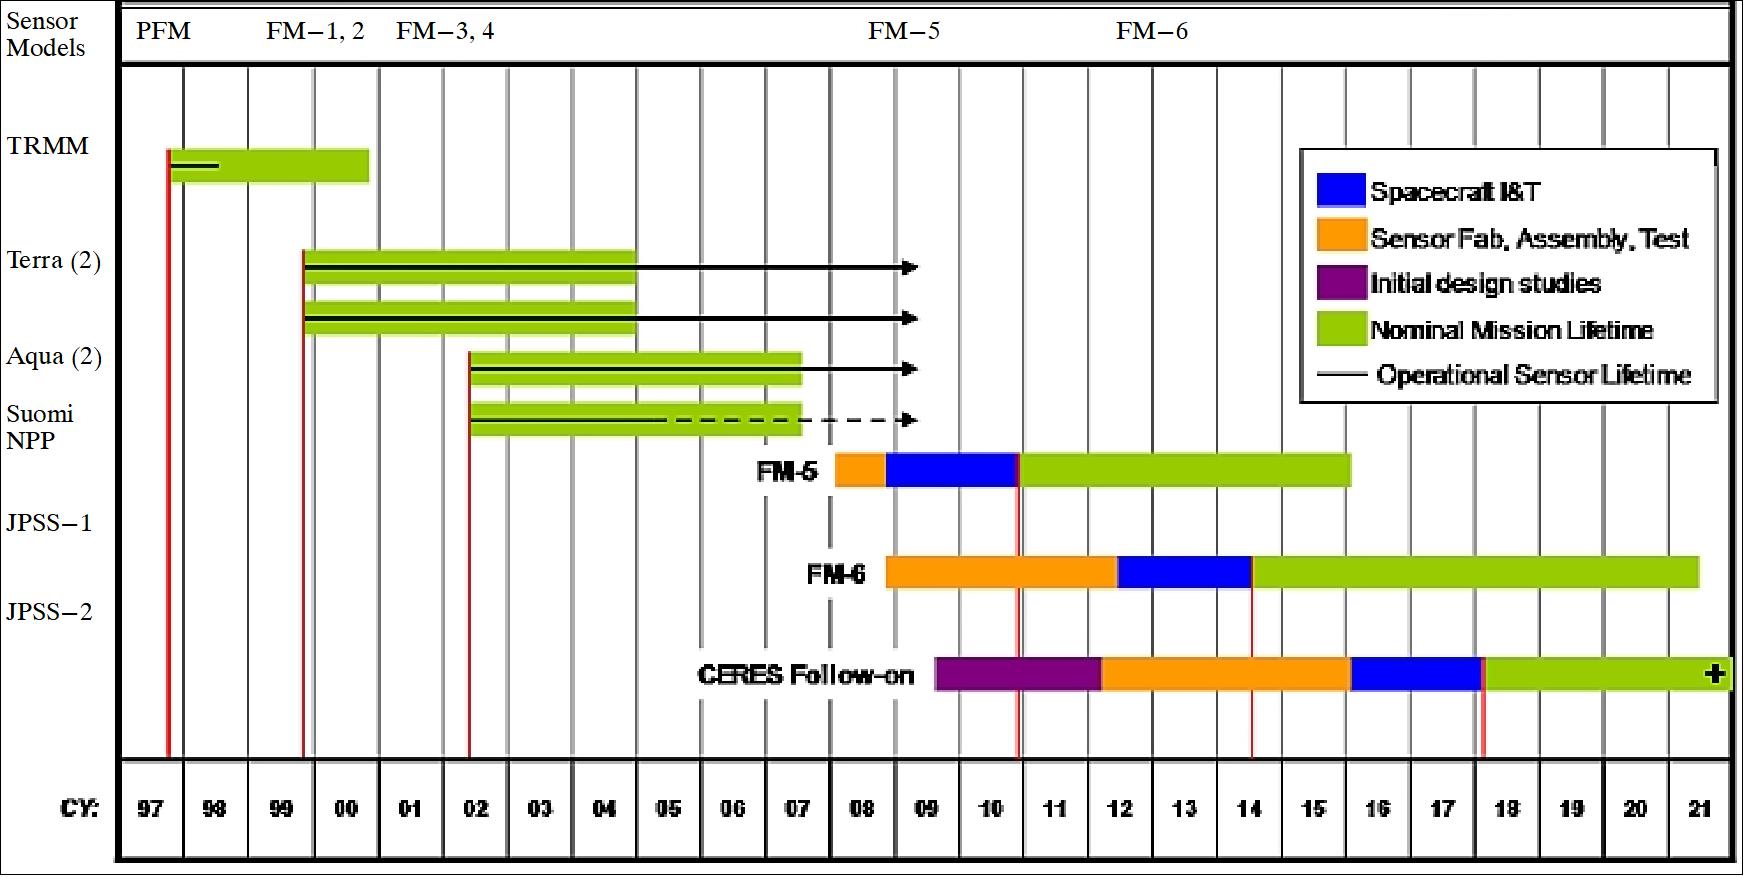 Figure 82: Overview of past, current and future missions with corresponding CERES instrument FM generations (image credit: NASA/LaRC, Ref. 100) 103)